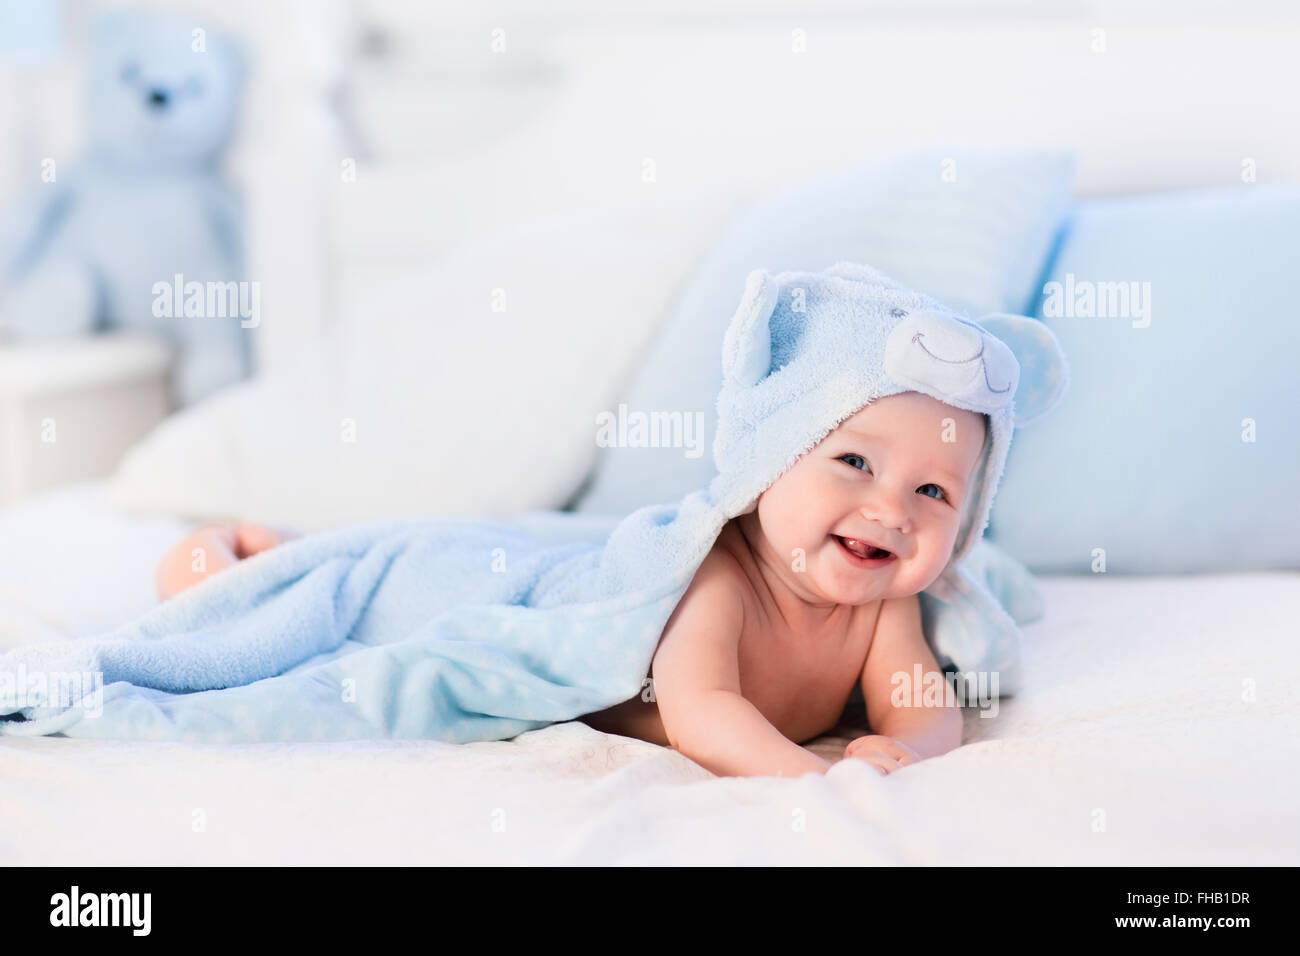 Baby boy wearing diaper and blue towel in white sunny bedroom. Newborn child relaxing in bed after bath or shower. Stock Photo